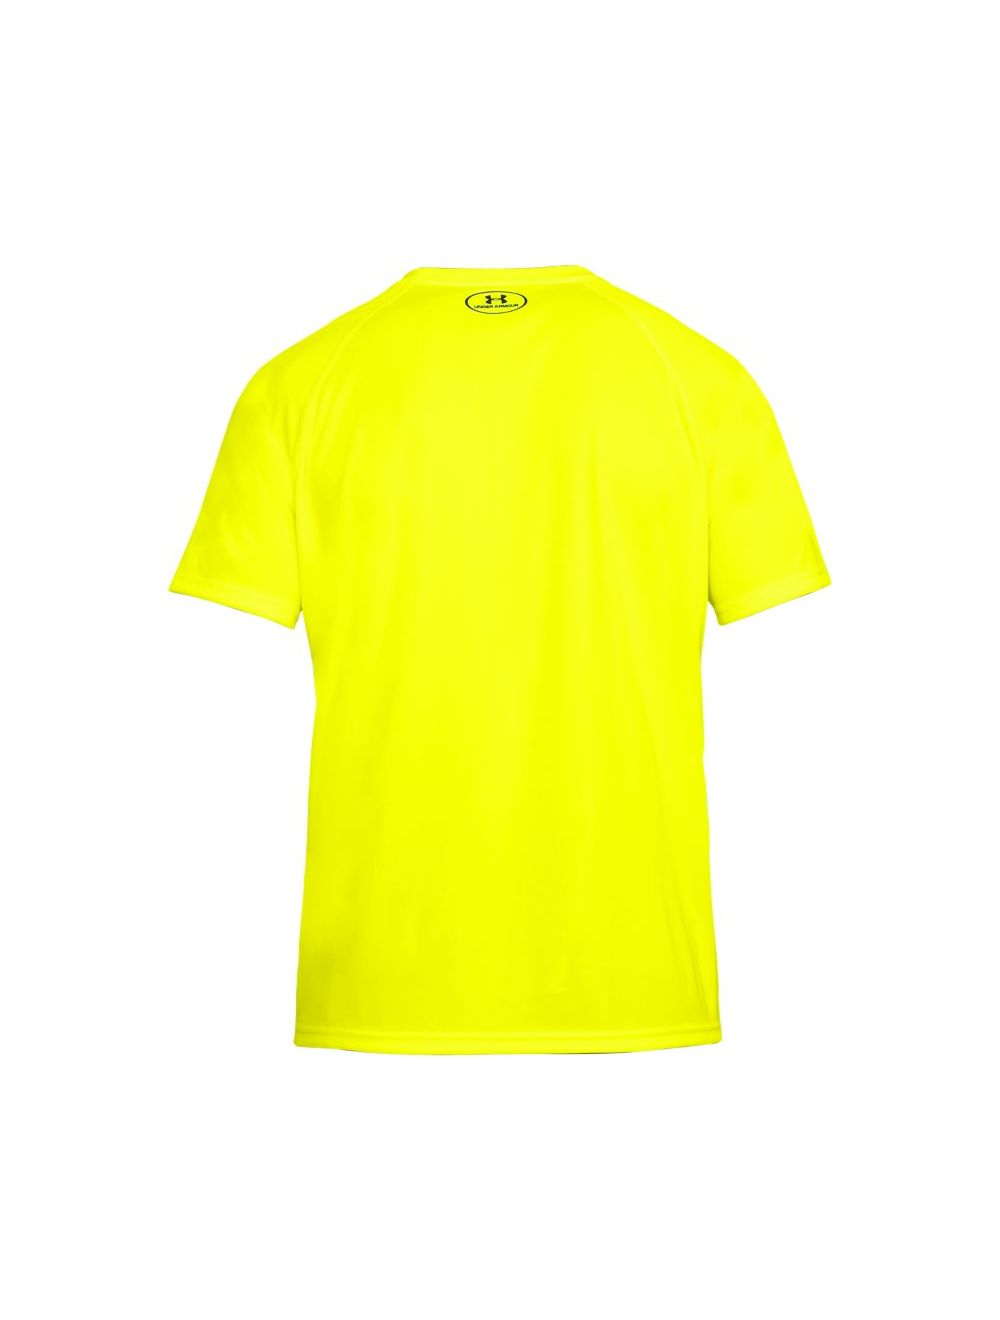 Under armour High Visibility Fishing Shirts & Tops for sale